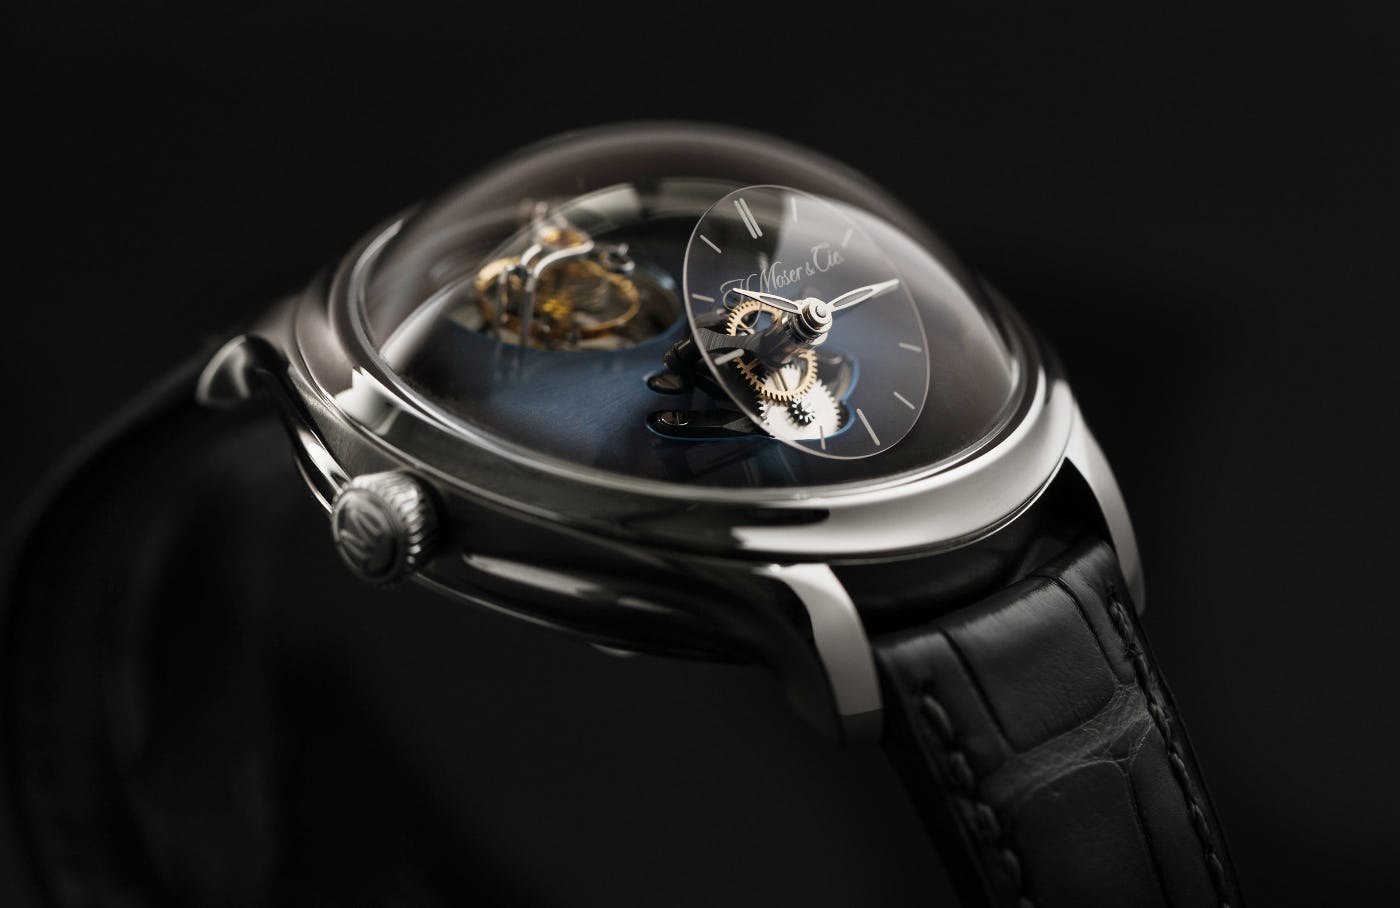 H. Moser x MB&F Endeavour Cylindrical Tourbillon watch